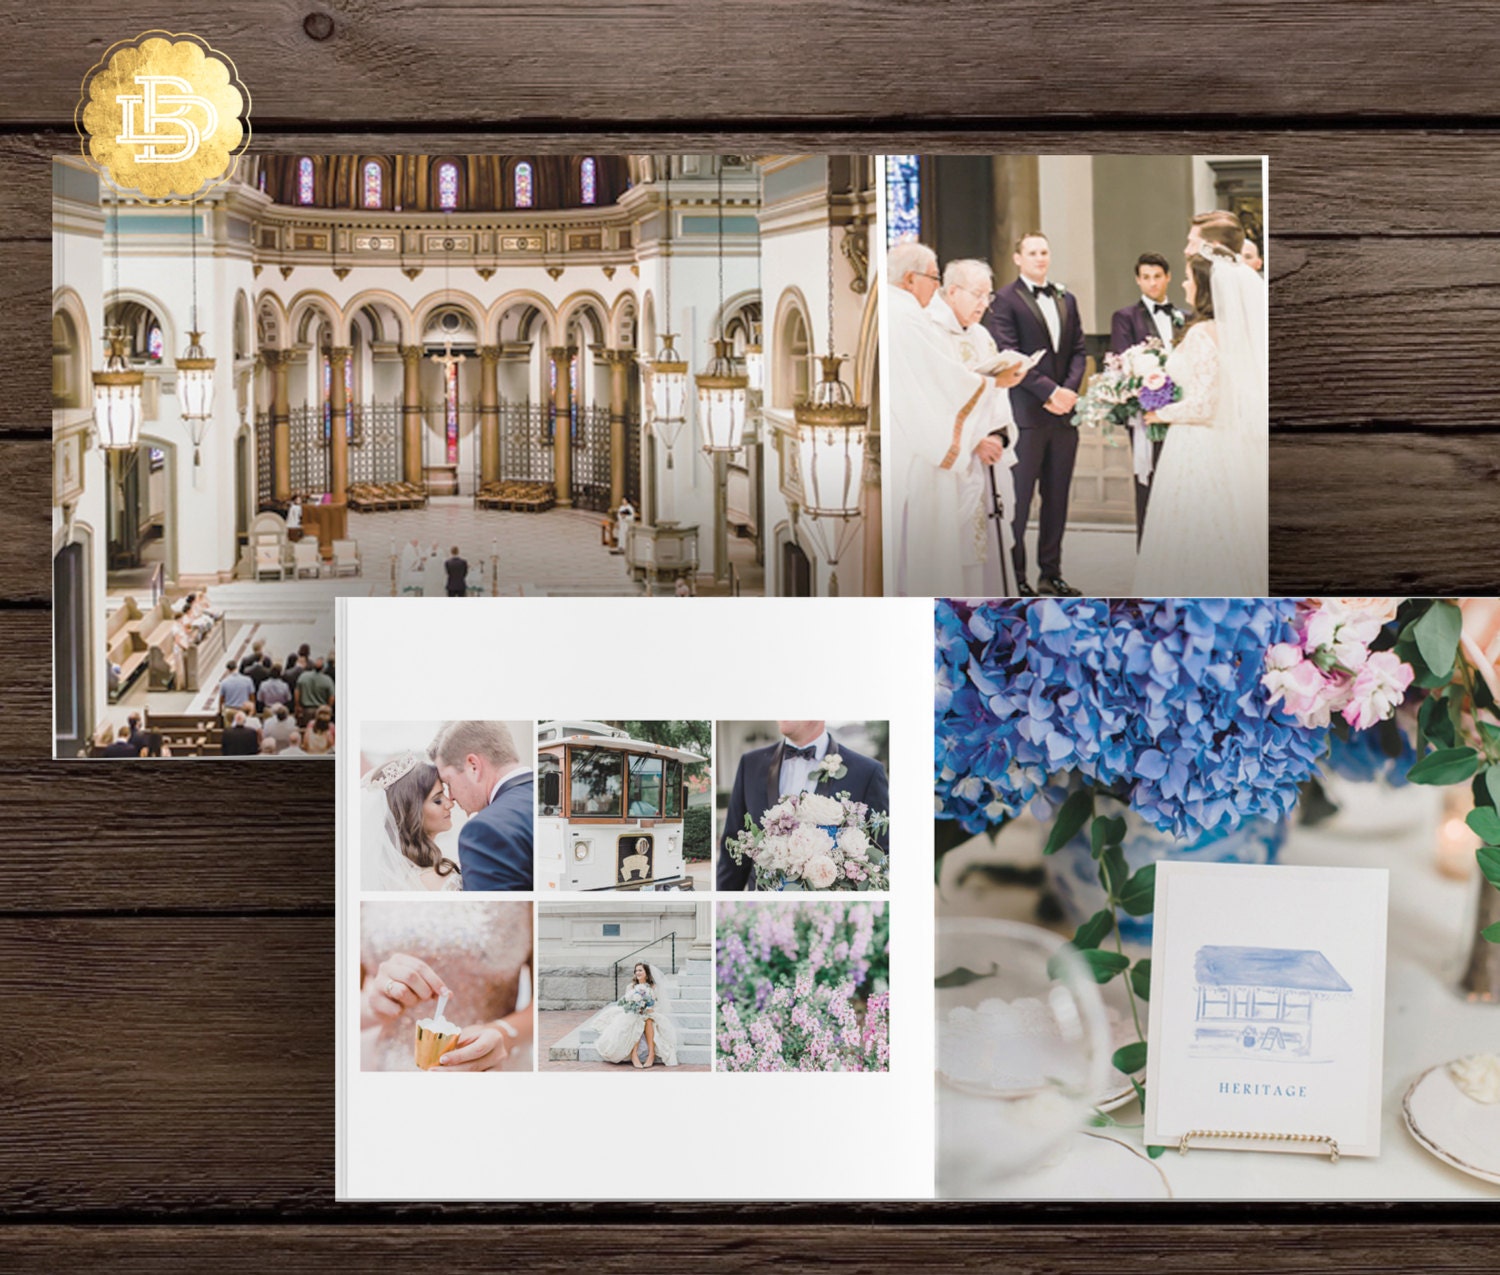 Mariage 2022 Album photo PSD Photoshop Template, Livre photo de mariage  Photoshop Template, Album photo imprimable, 12x12in, 10x10in, WA71 -   Canada